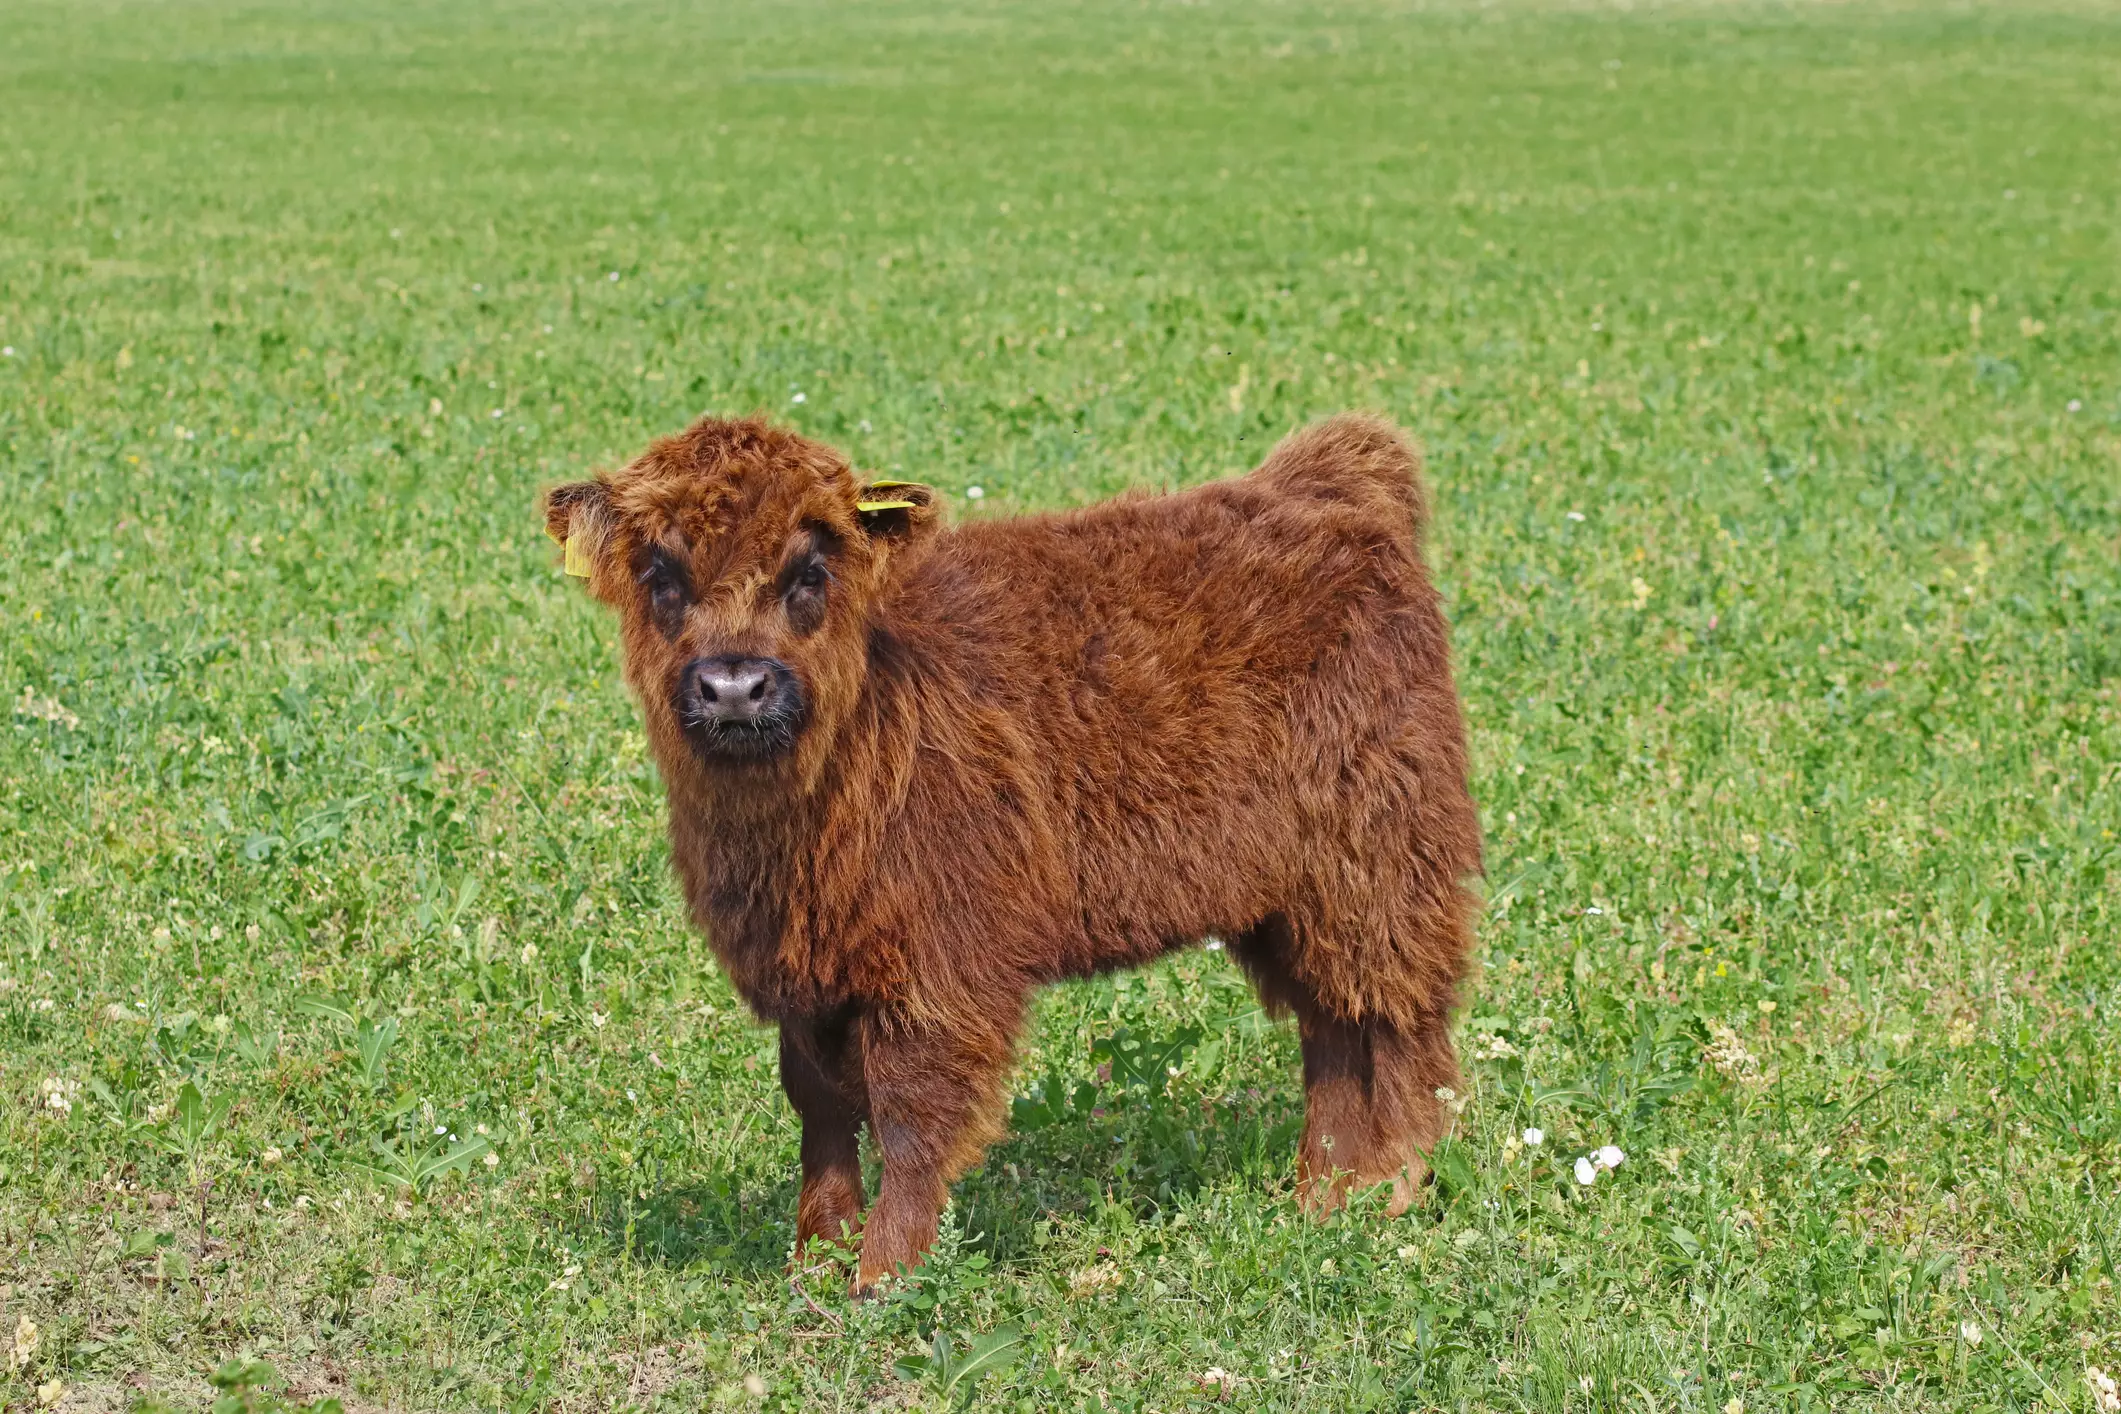 You Can Get Yourself A Fluffy Miniature Cow For A Pet